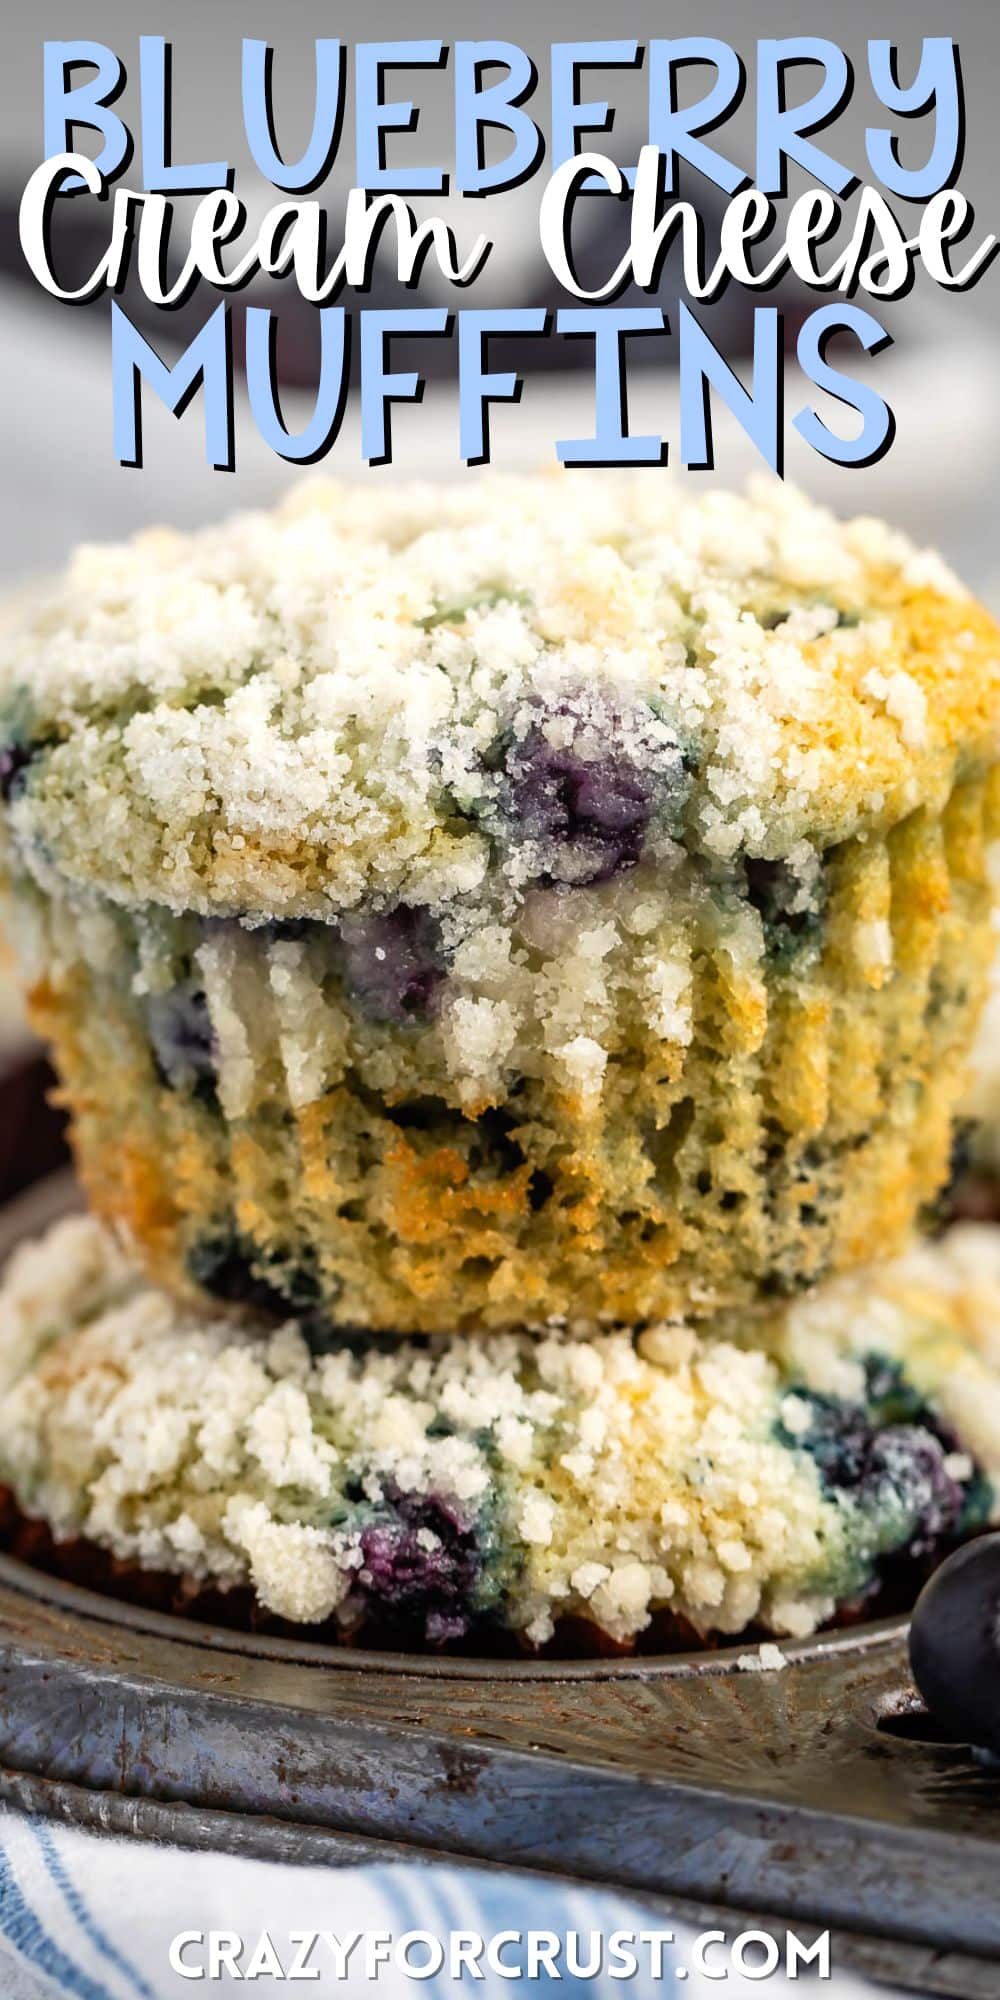 muffins with cream cheese and blueberries inside stacked together with words on the image.